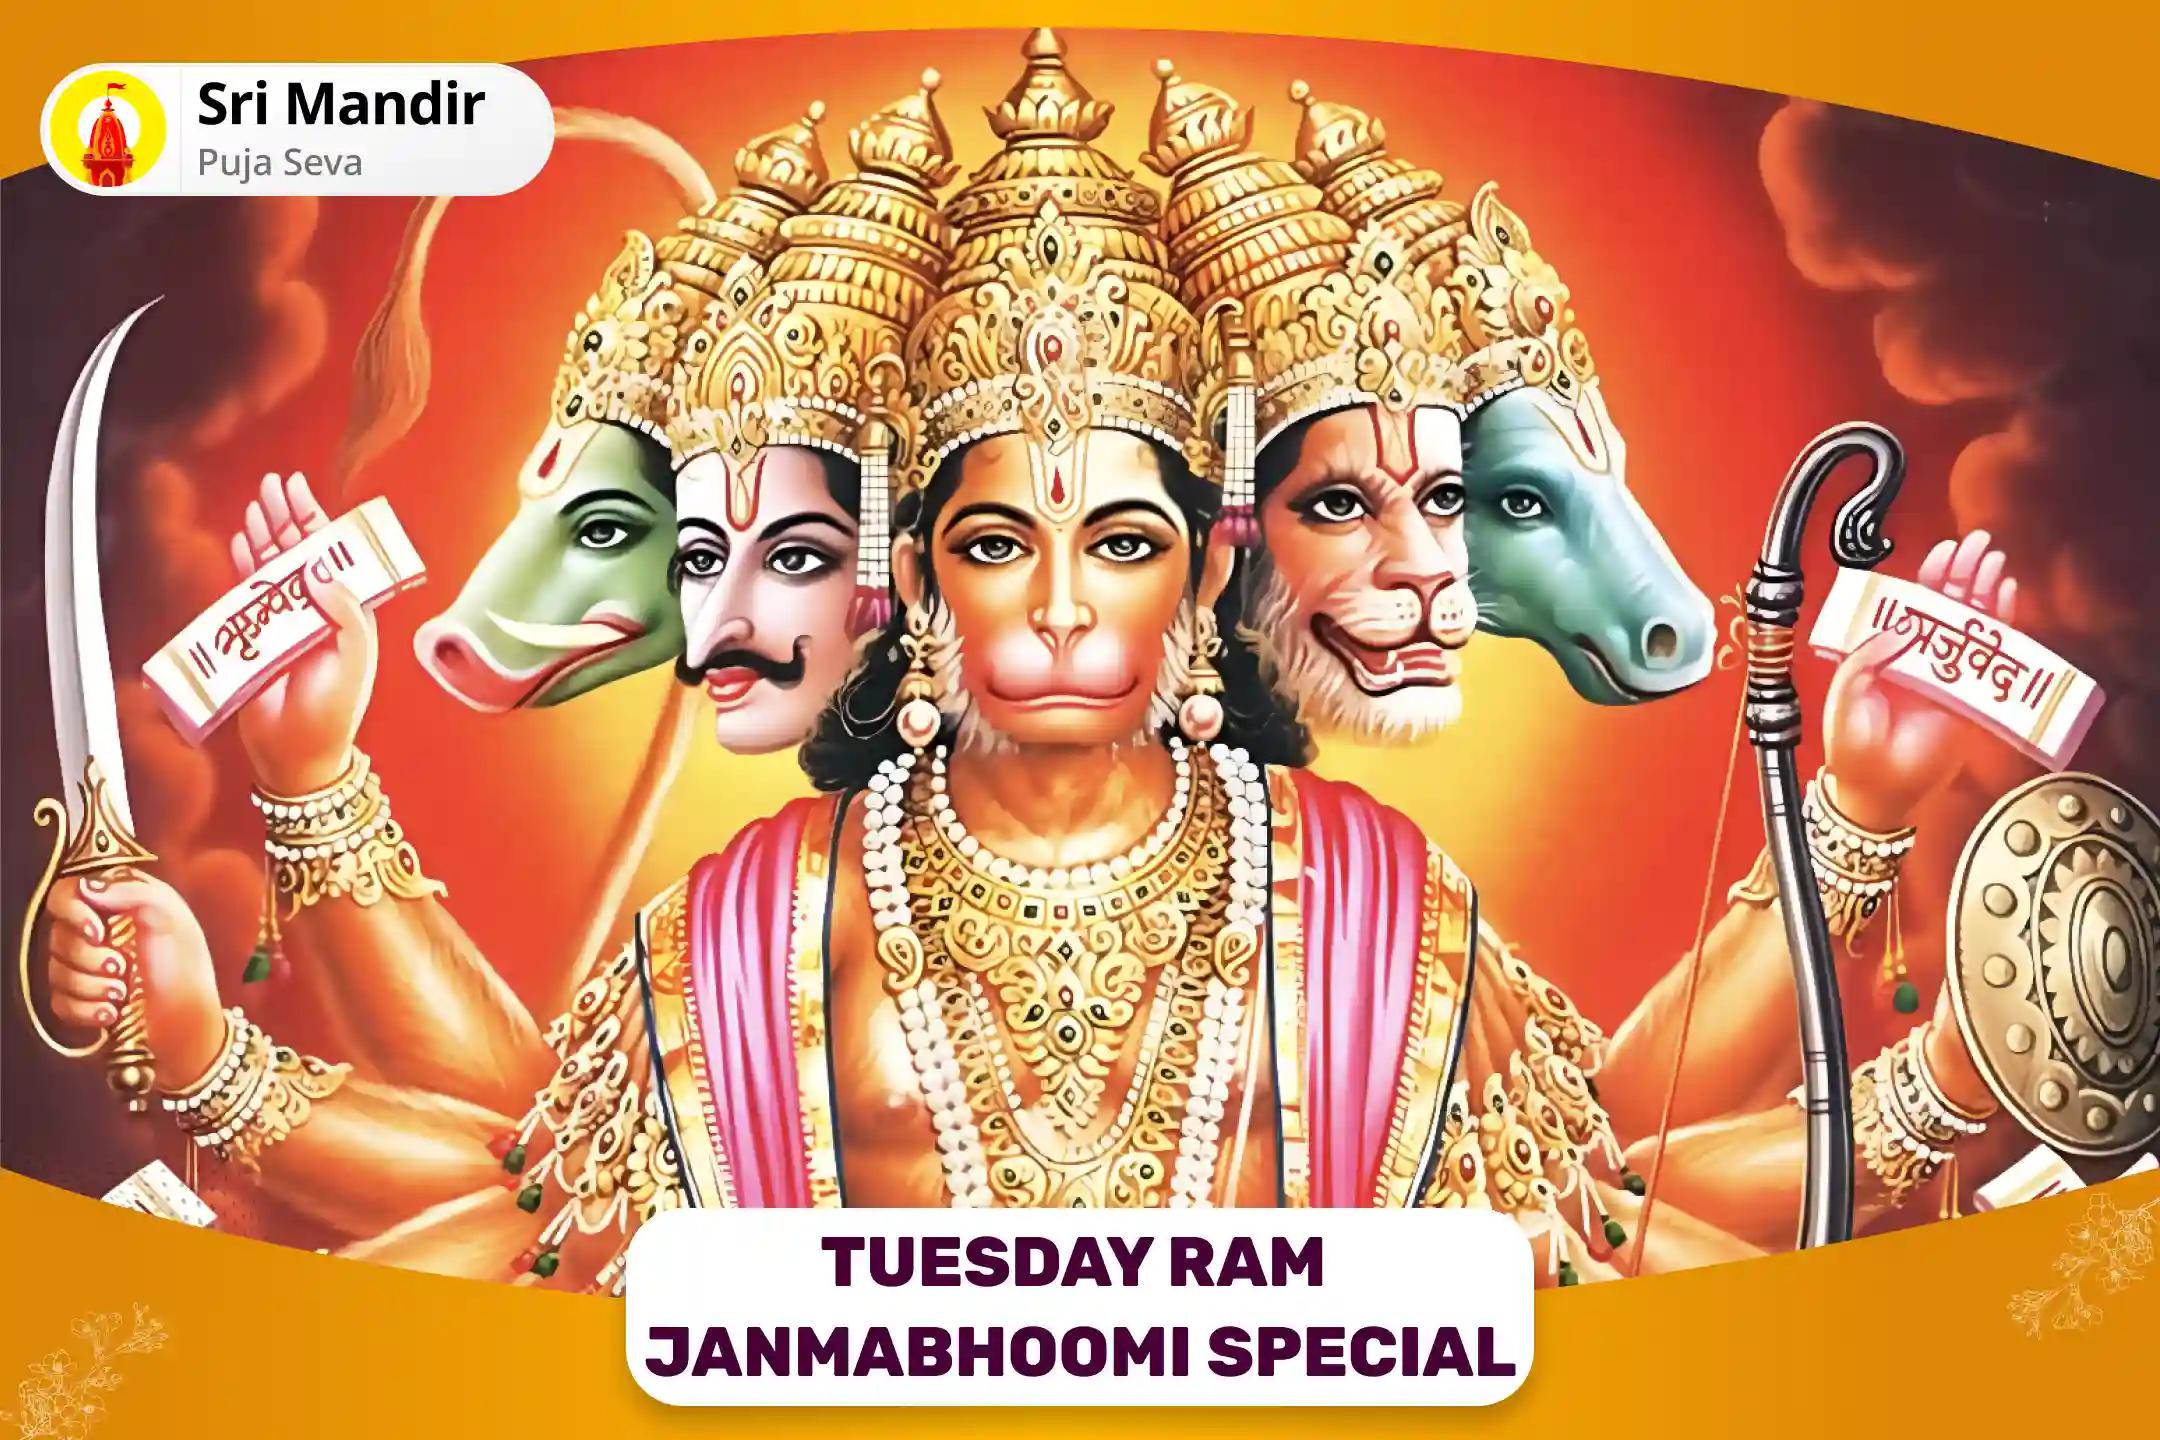 Tuesday Ram Janmabhoomi Special 1008 Hanuman Rudra Mantra Jaap and Hanuman Yagya for Courage and Strength to Overcome Obstacles in Life